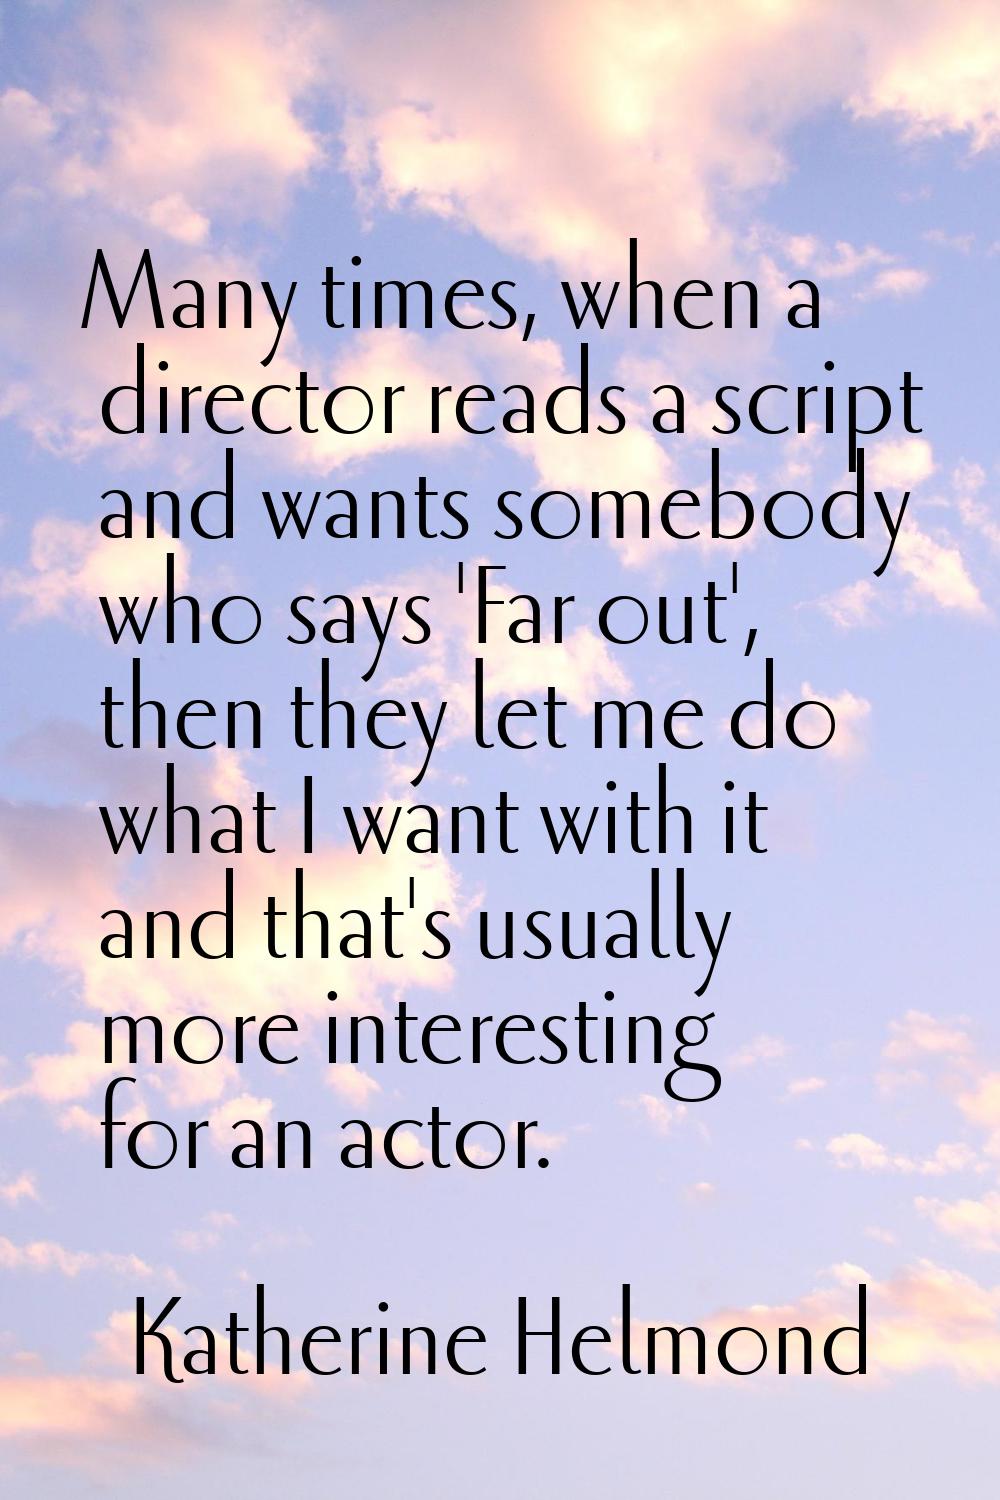 Many times, when a director reads a script and wants somebody who says 'Far out', then they let me 